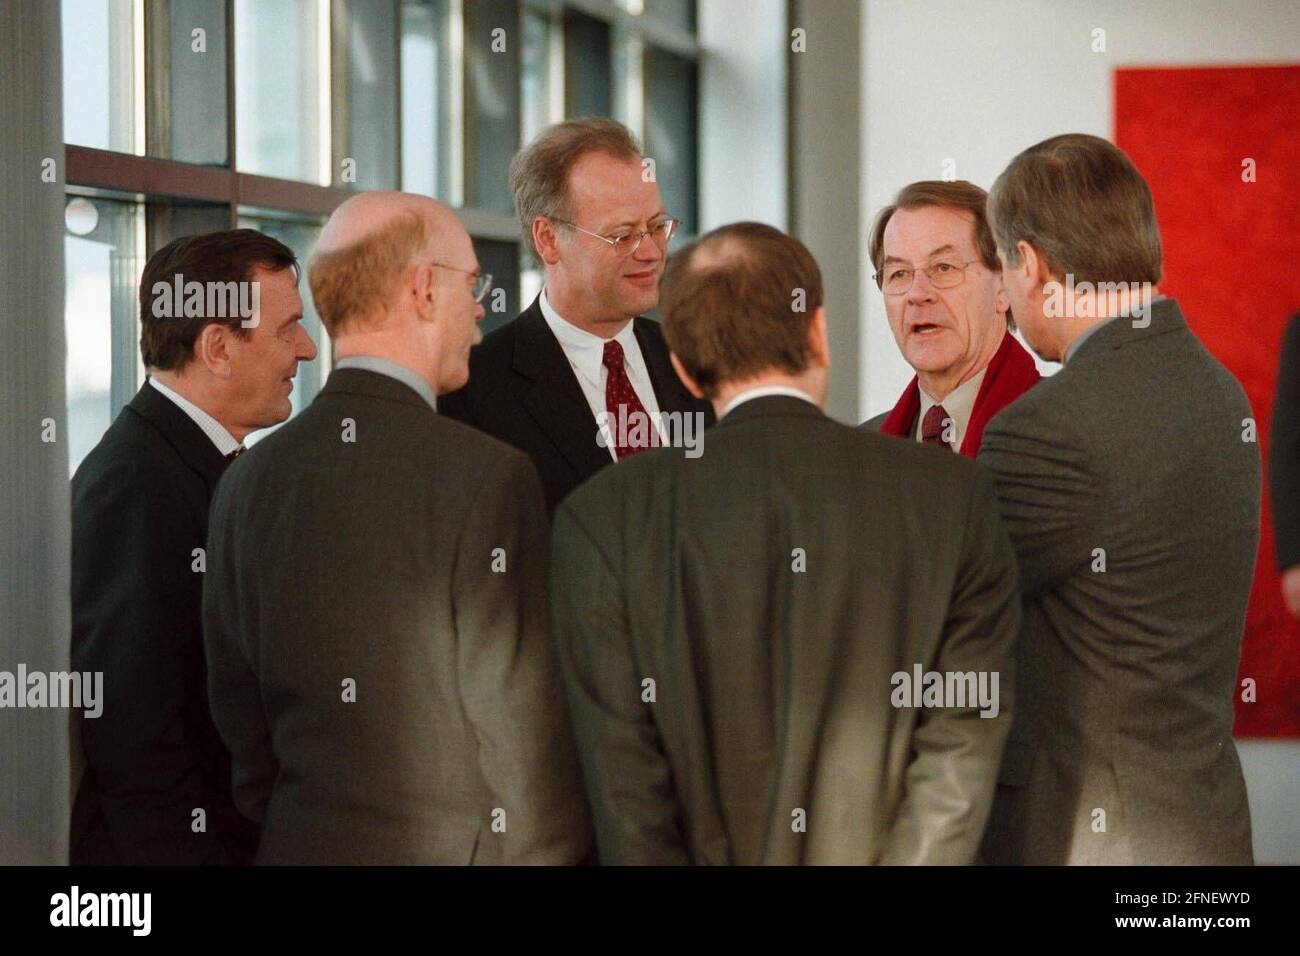 Gerhard Schröder, SPD, Federal Chancellor, Peter Struck, SPD, parliamentary party leader, Rudolf Scharping, SPD, Federal Minister of Defence, Reinhard Höppner (from back), SPD, Minister President Saxony-Anhalt, Franz Müntefering, SPD, com. Federal Secretary, and Wolfgang Clement, SPD, Minister President of North Rhine-Westphalia, before the start of the SPD Executive Committee meeting in the Willi Brand House, Berlin. [automated translation] Stock Photo